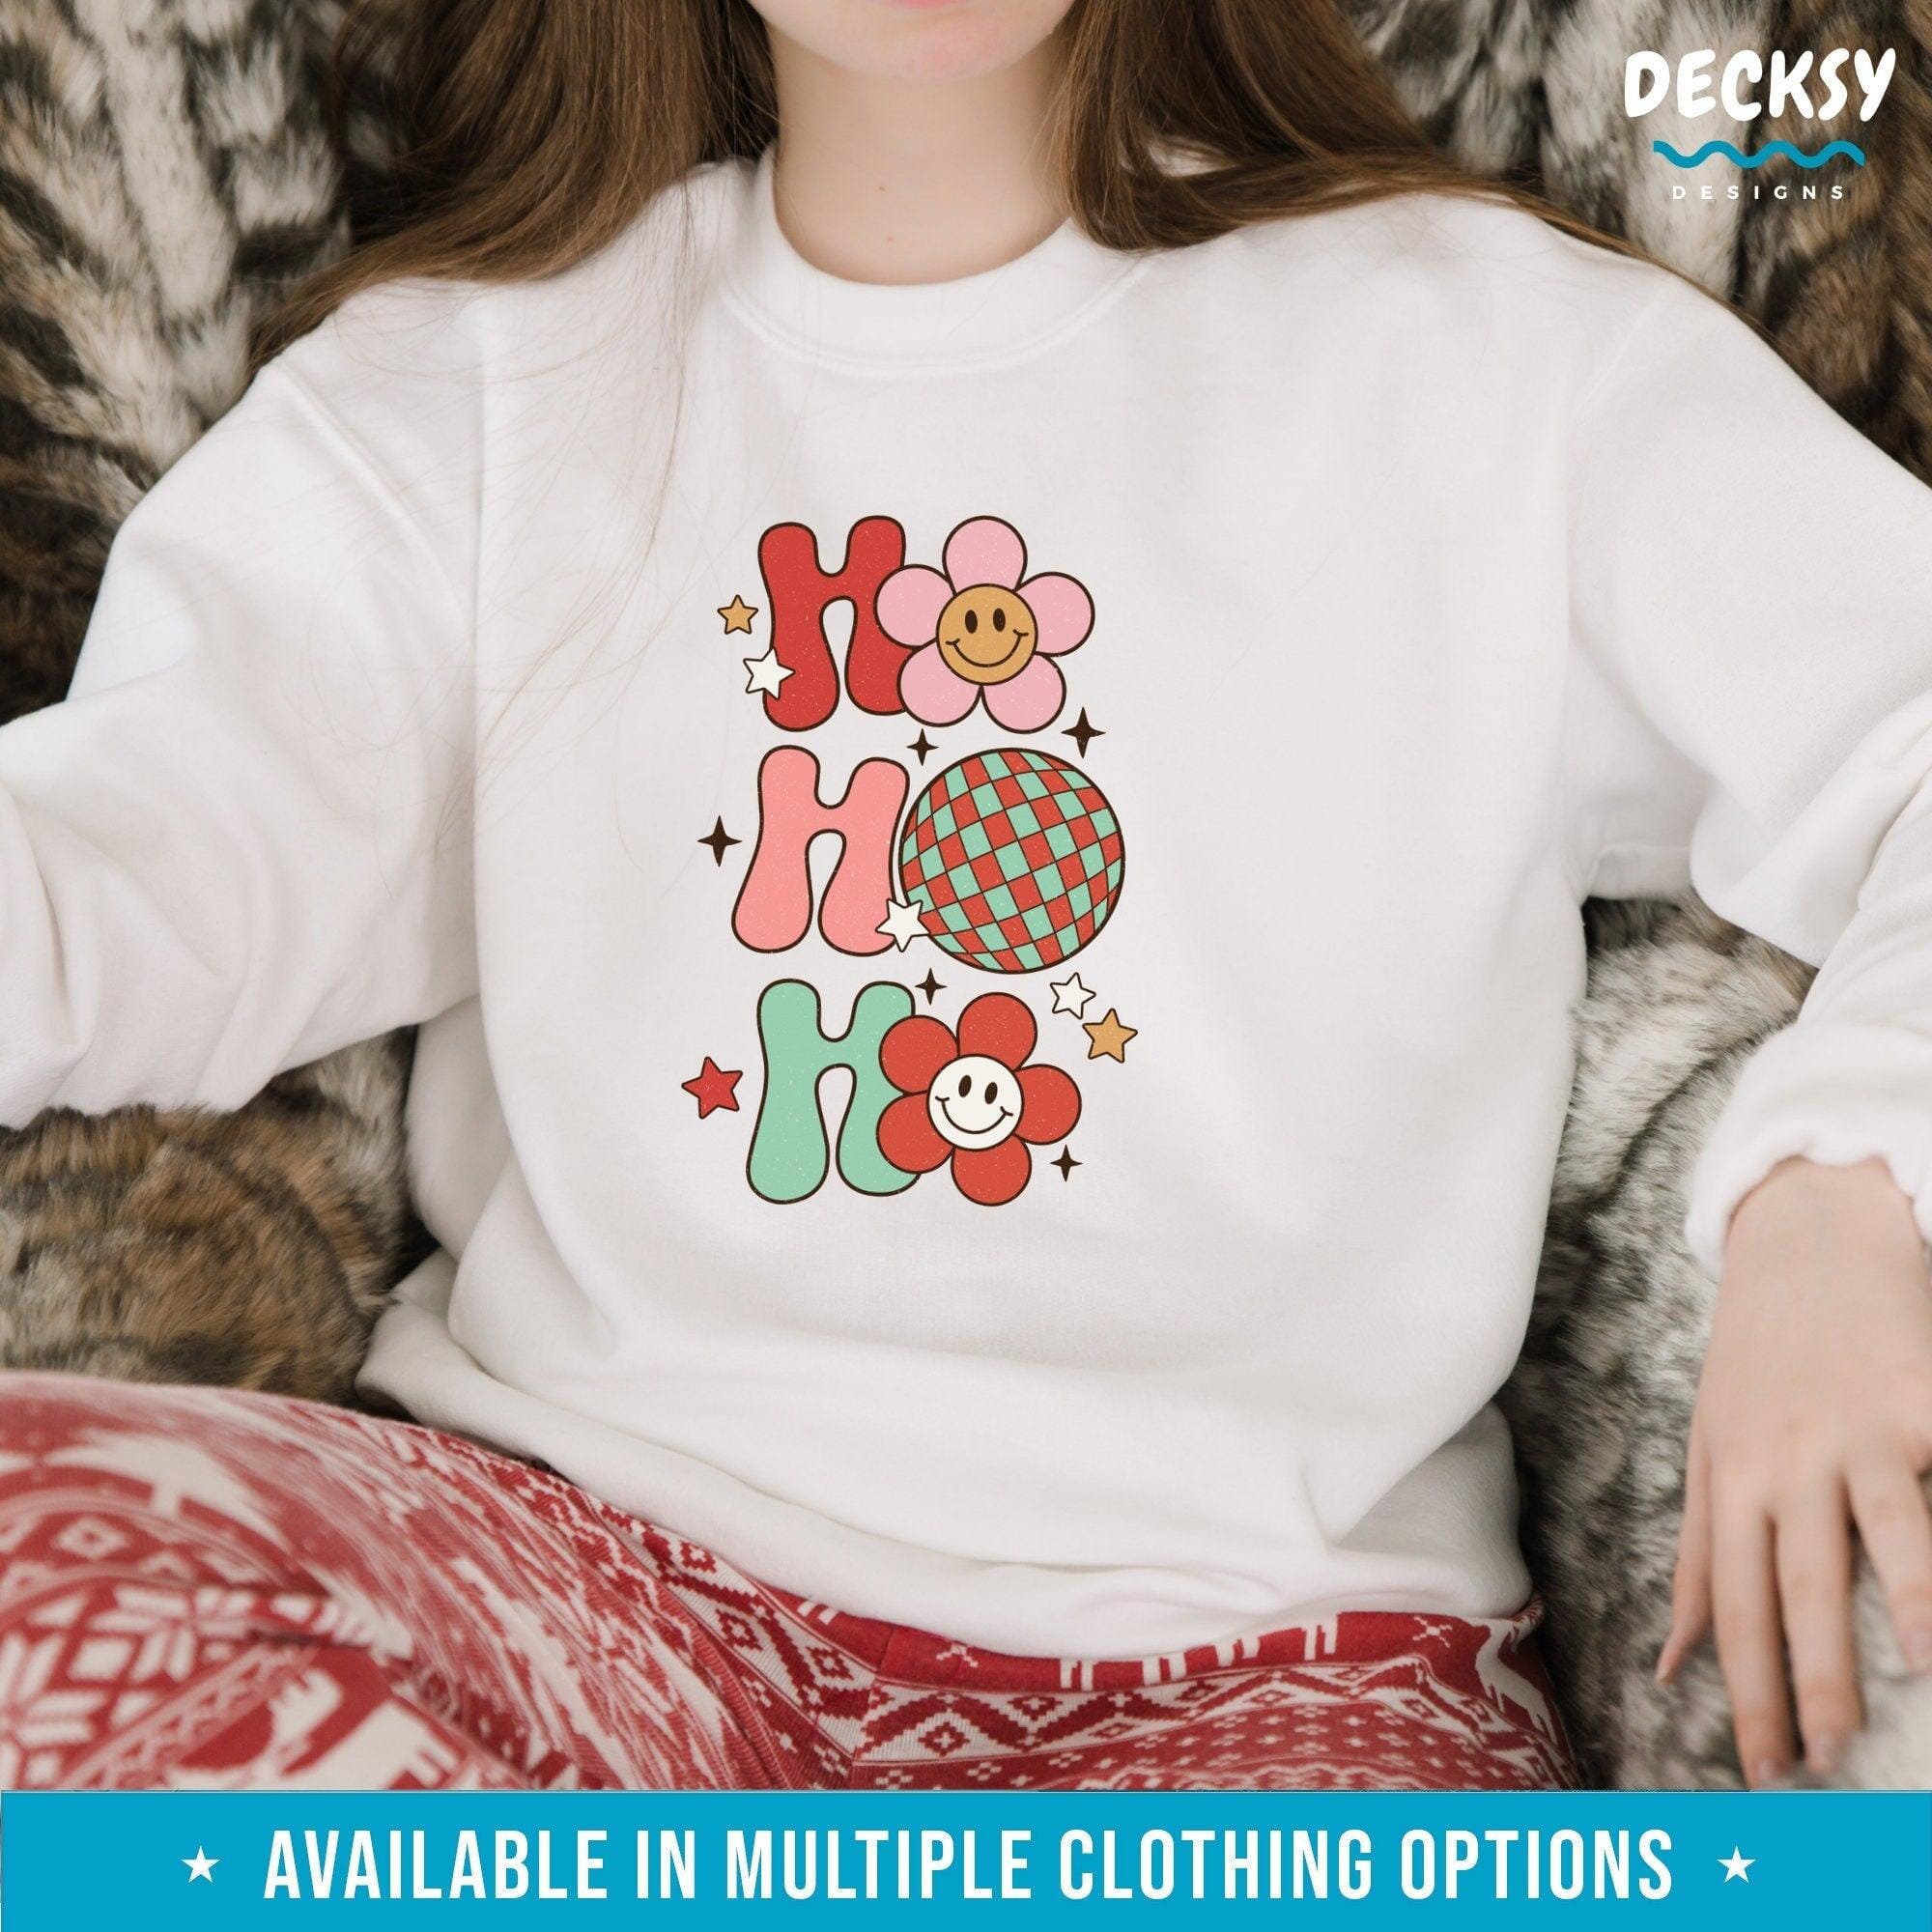 Ho Ho Ho Shirt, Holiday Shirt Gift For Family-Clothing:Gender-Neutral Adult Clothing:Tops & Tees:T-shirts:Graphic Tees-DecksyDesigns